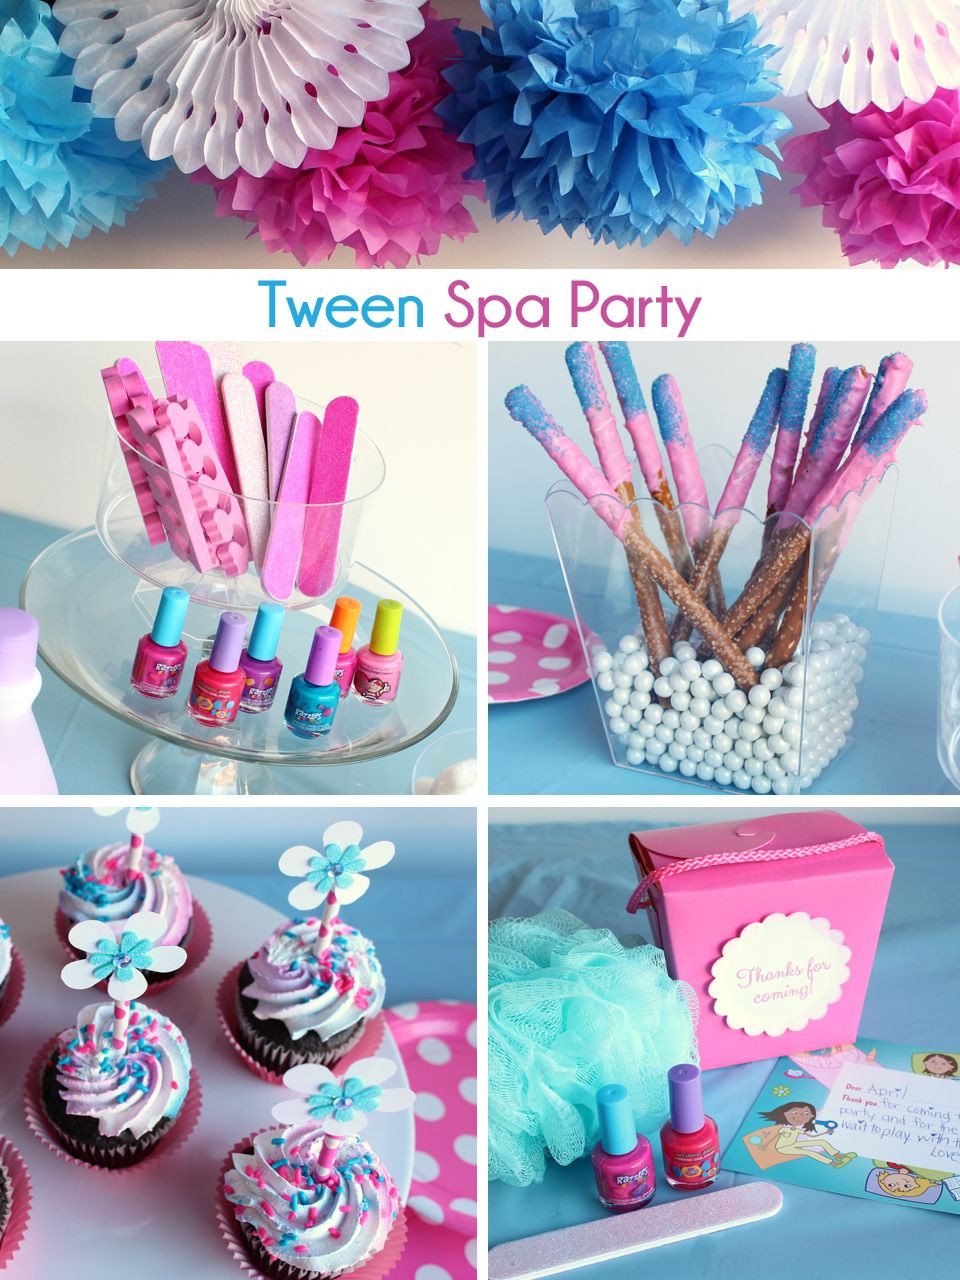 Spa Party Food Ideas For Tweens
 Tween Spa Party Ideas décor activities and sweets to